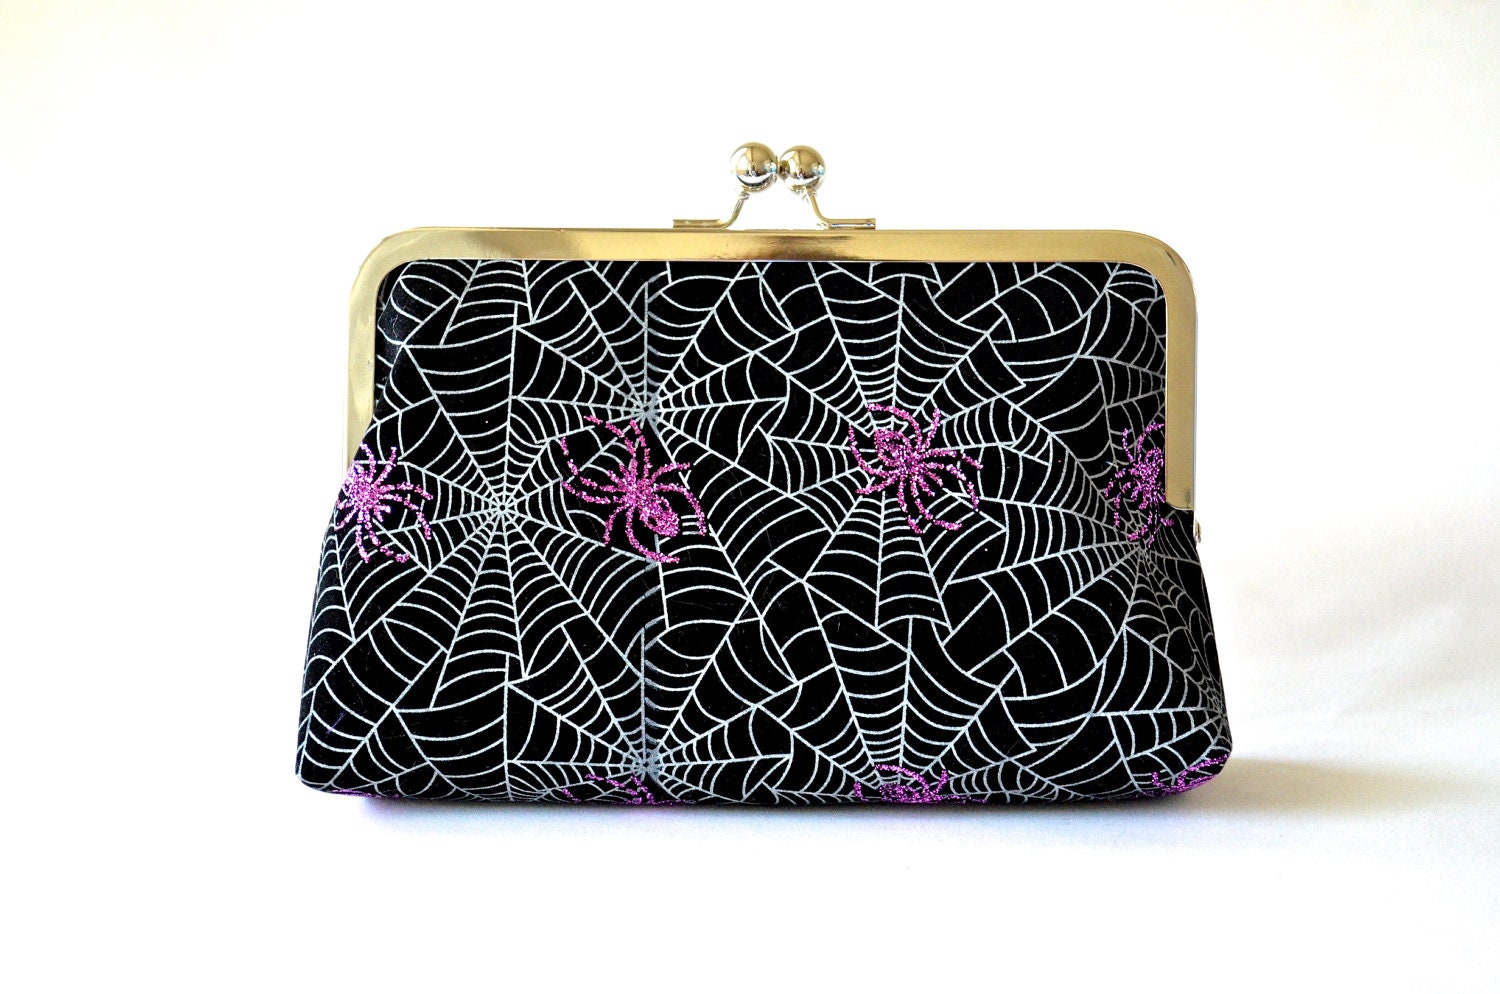 Sparkly Spiders Clutch Bag Purse Halloween Accessories by Lolis Creations - loliscreations